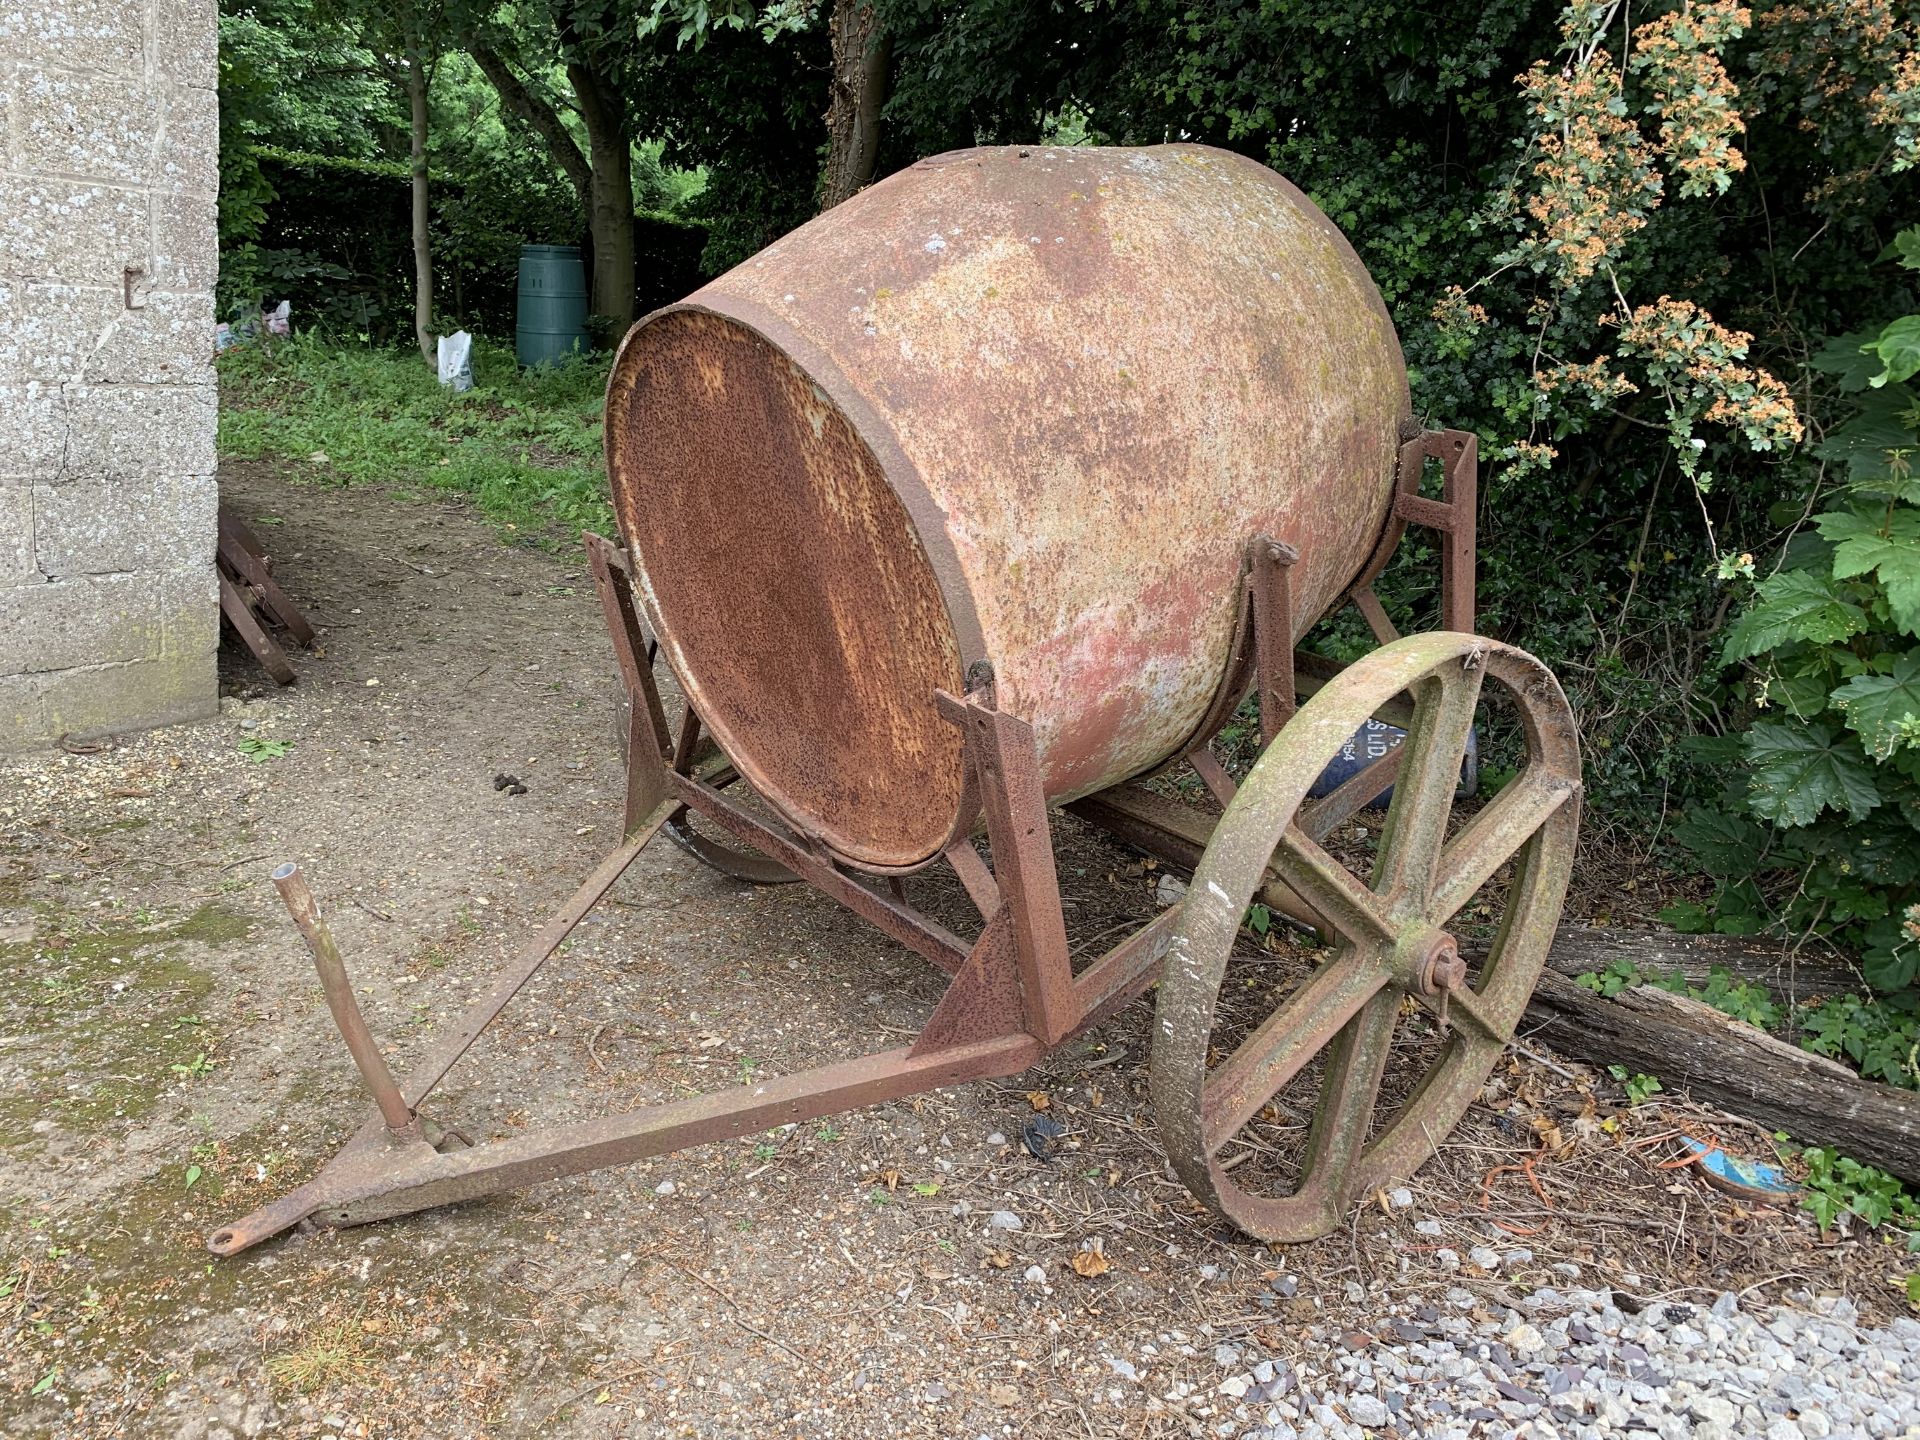 Antique water tank on trolley, believed 100+ years old